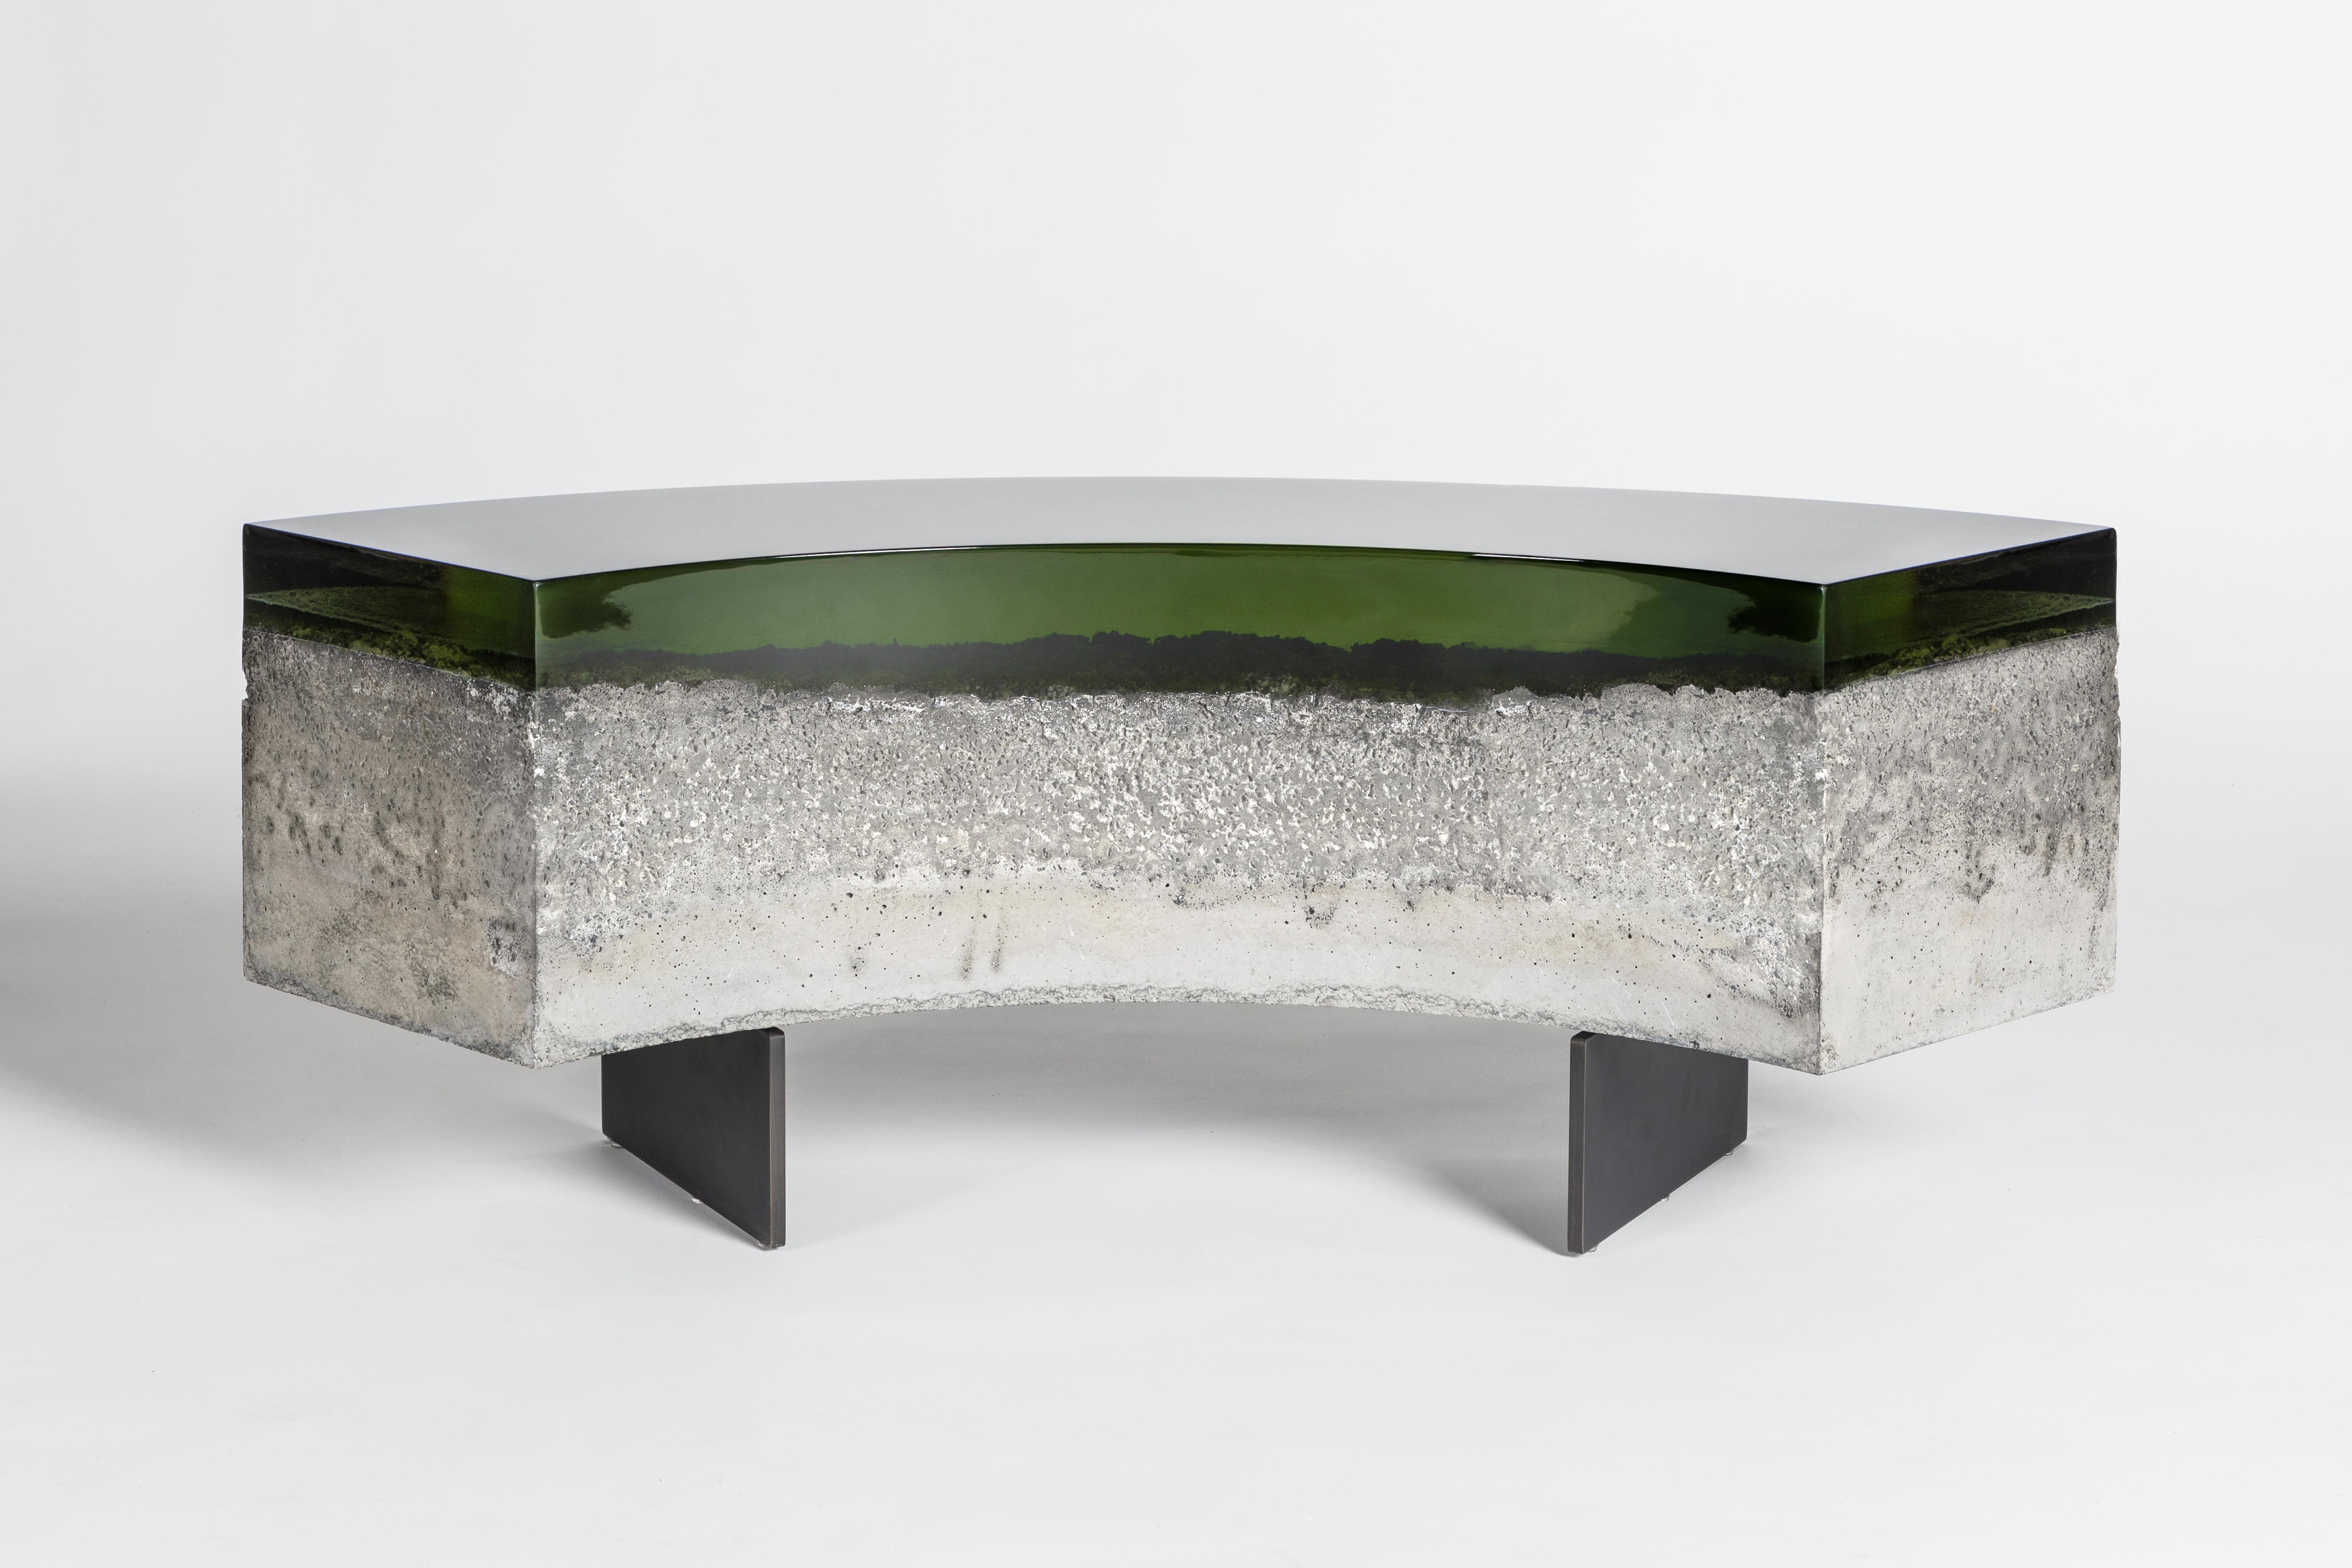 Italian Cala Bench by Draga&Aurel Resin and Concrete, 21st Century For Sale